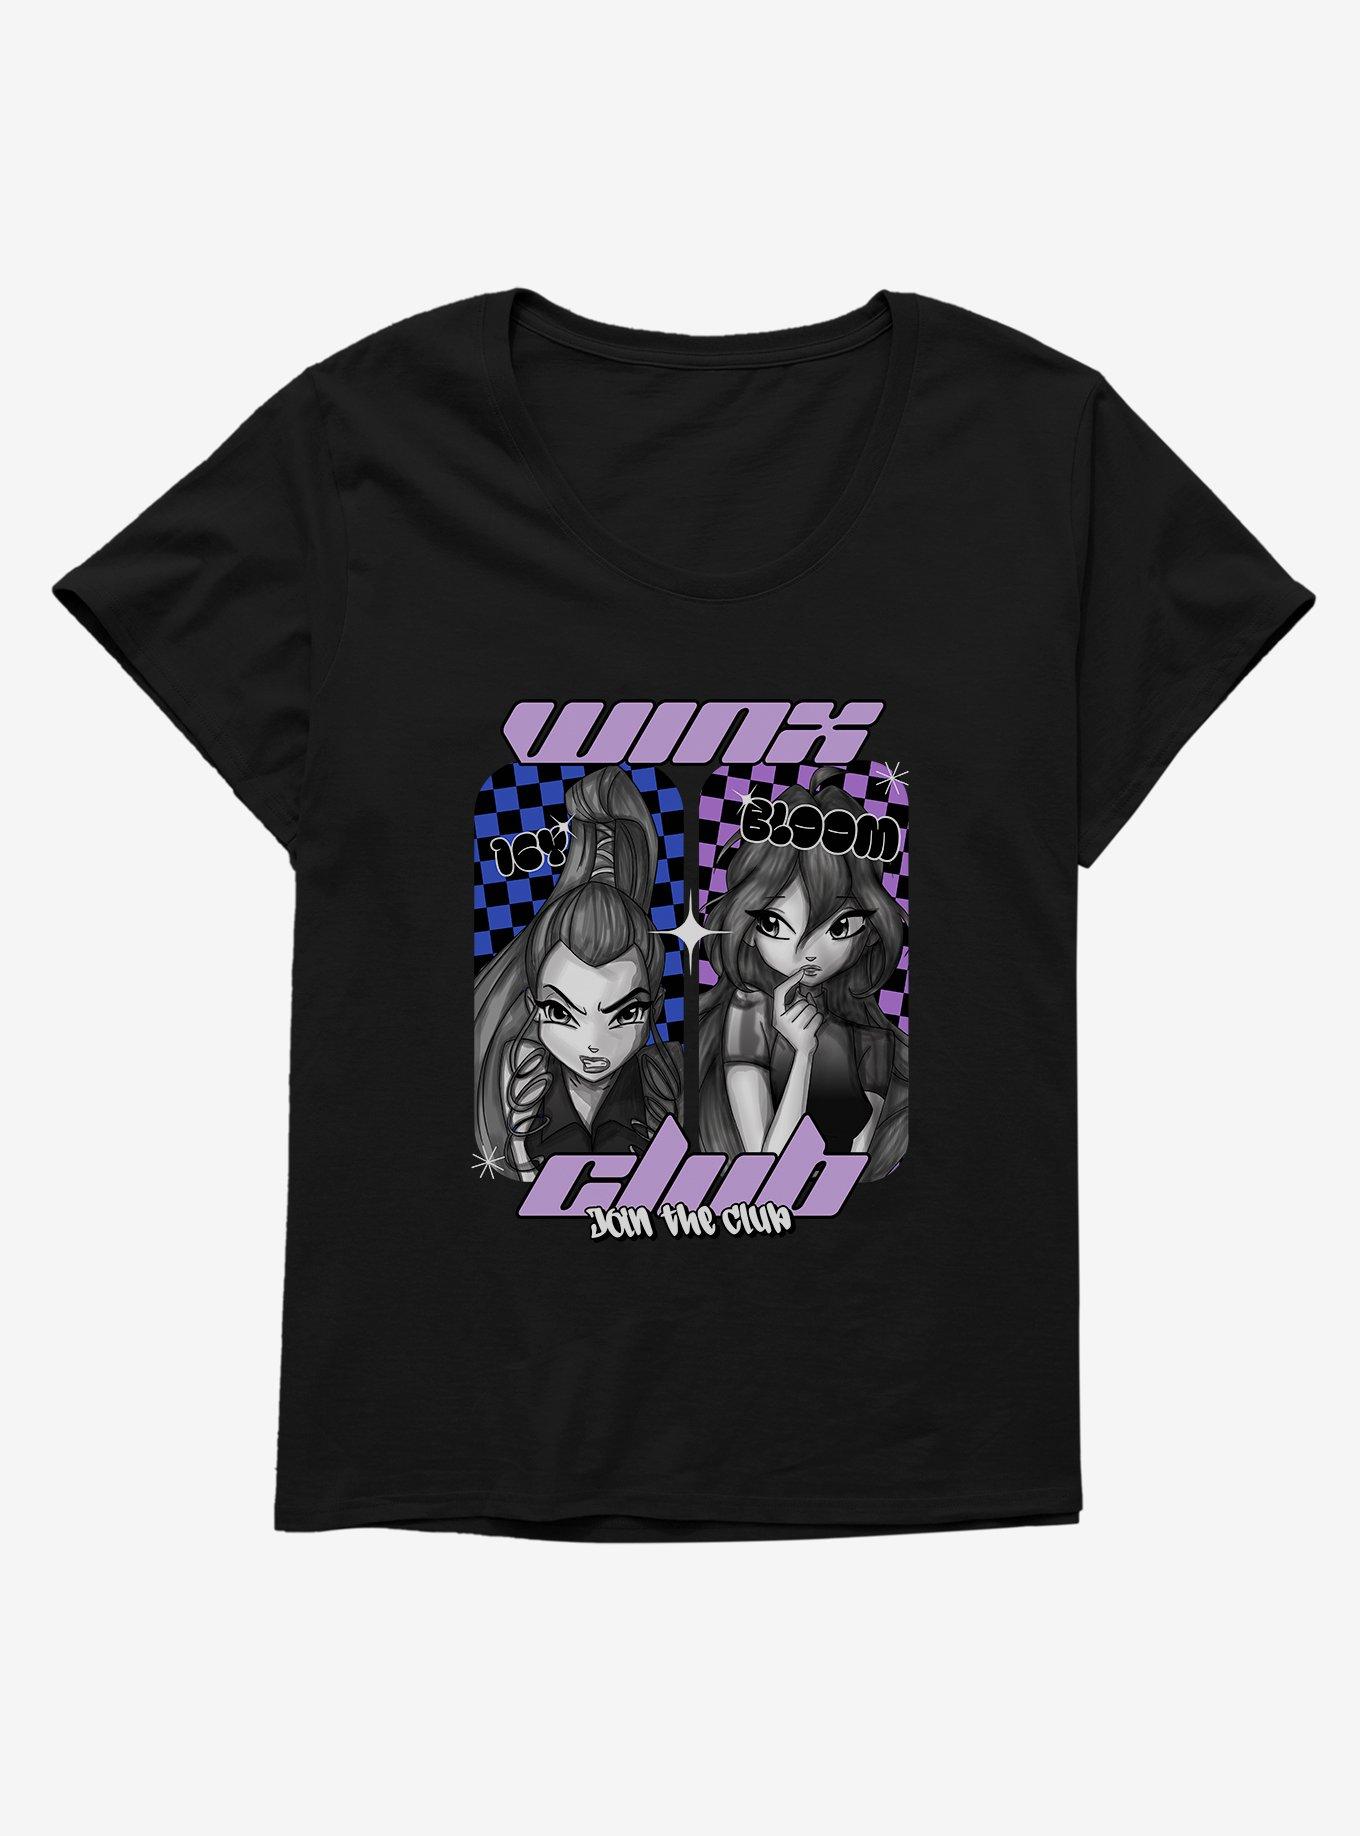 Winx Club Icy & Bloom Join The Club Womens T-Shirt Plus Size, BLACK, hi-res